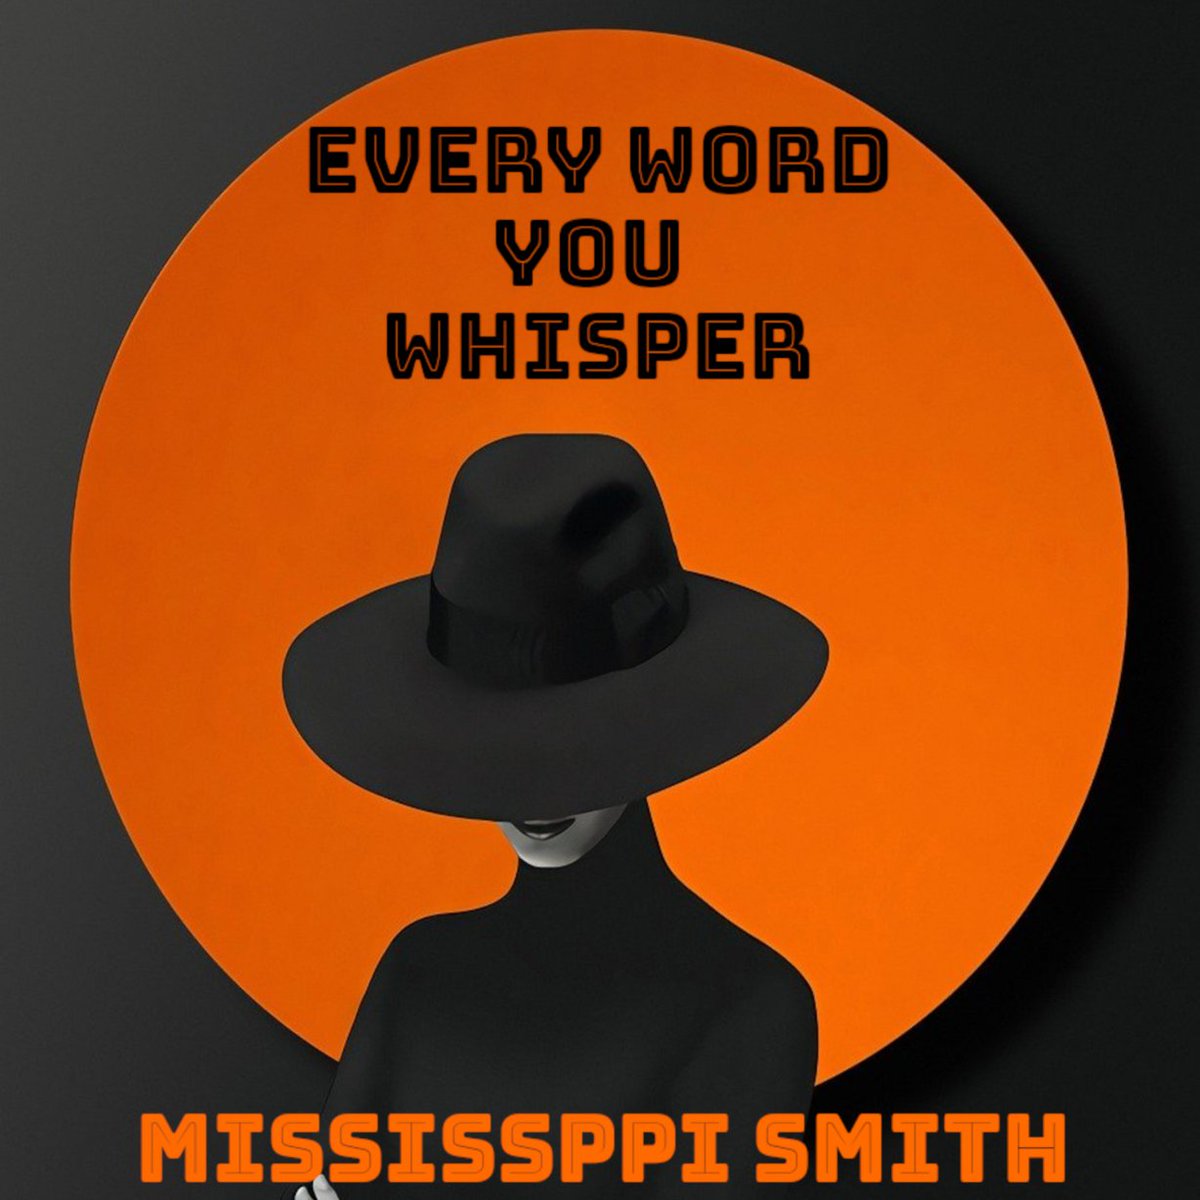 Very pleased to be able to say that the new single from Mississippi Smith is available now across all streaming platforms songwhip.com/mississippismi… open.spotify.com/album/02gQqz05…